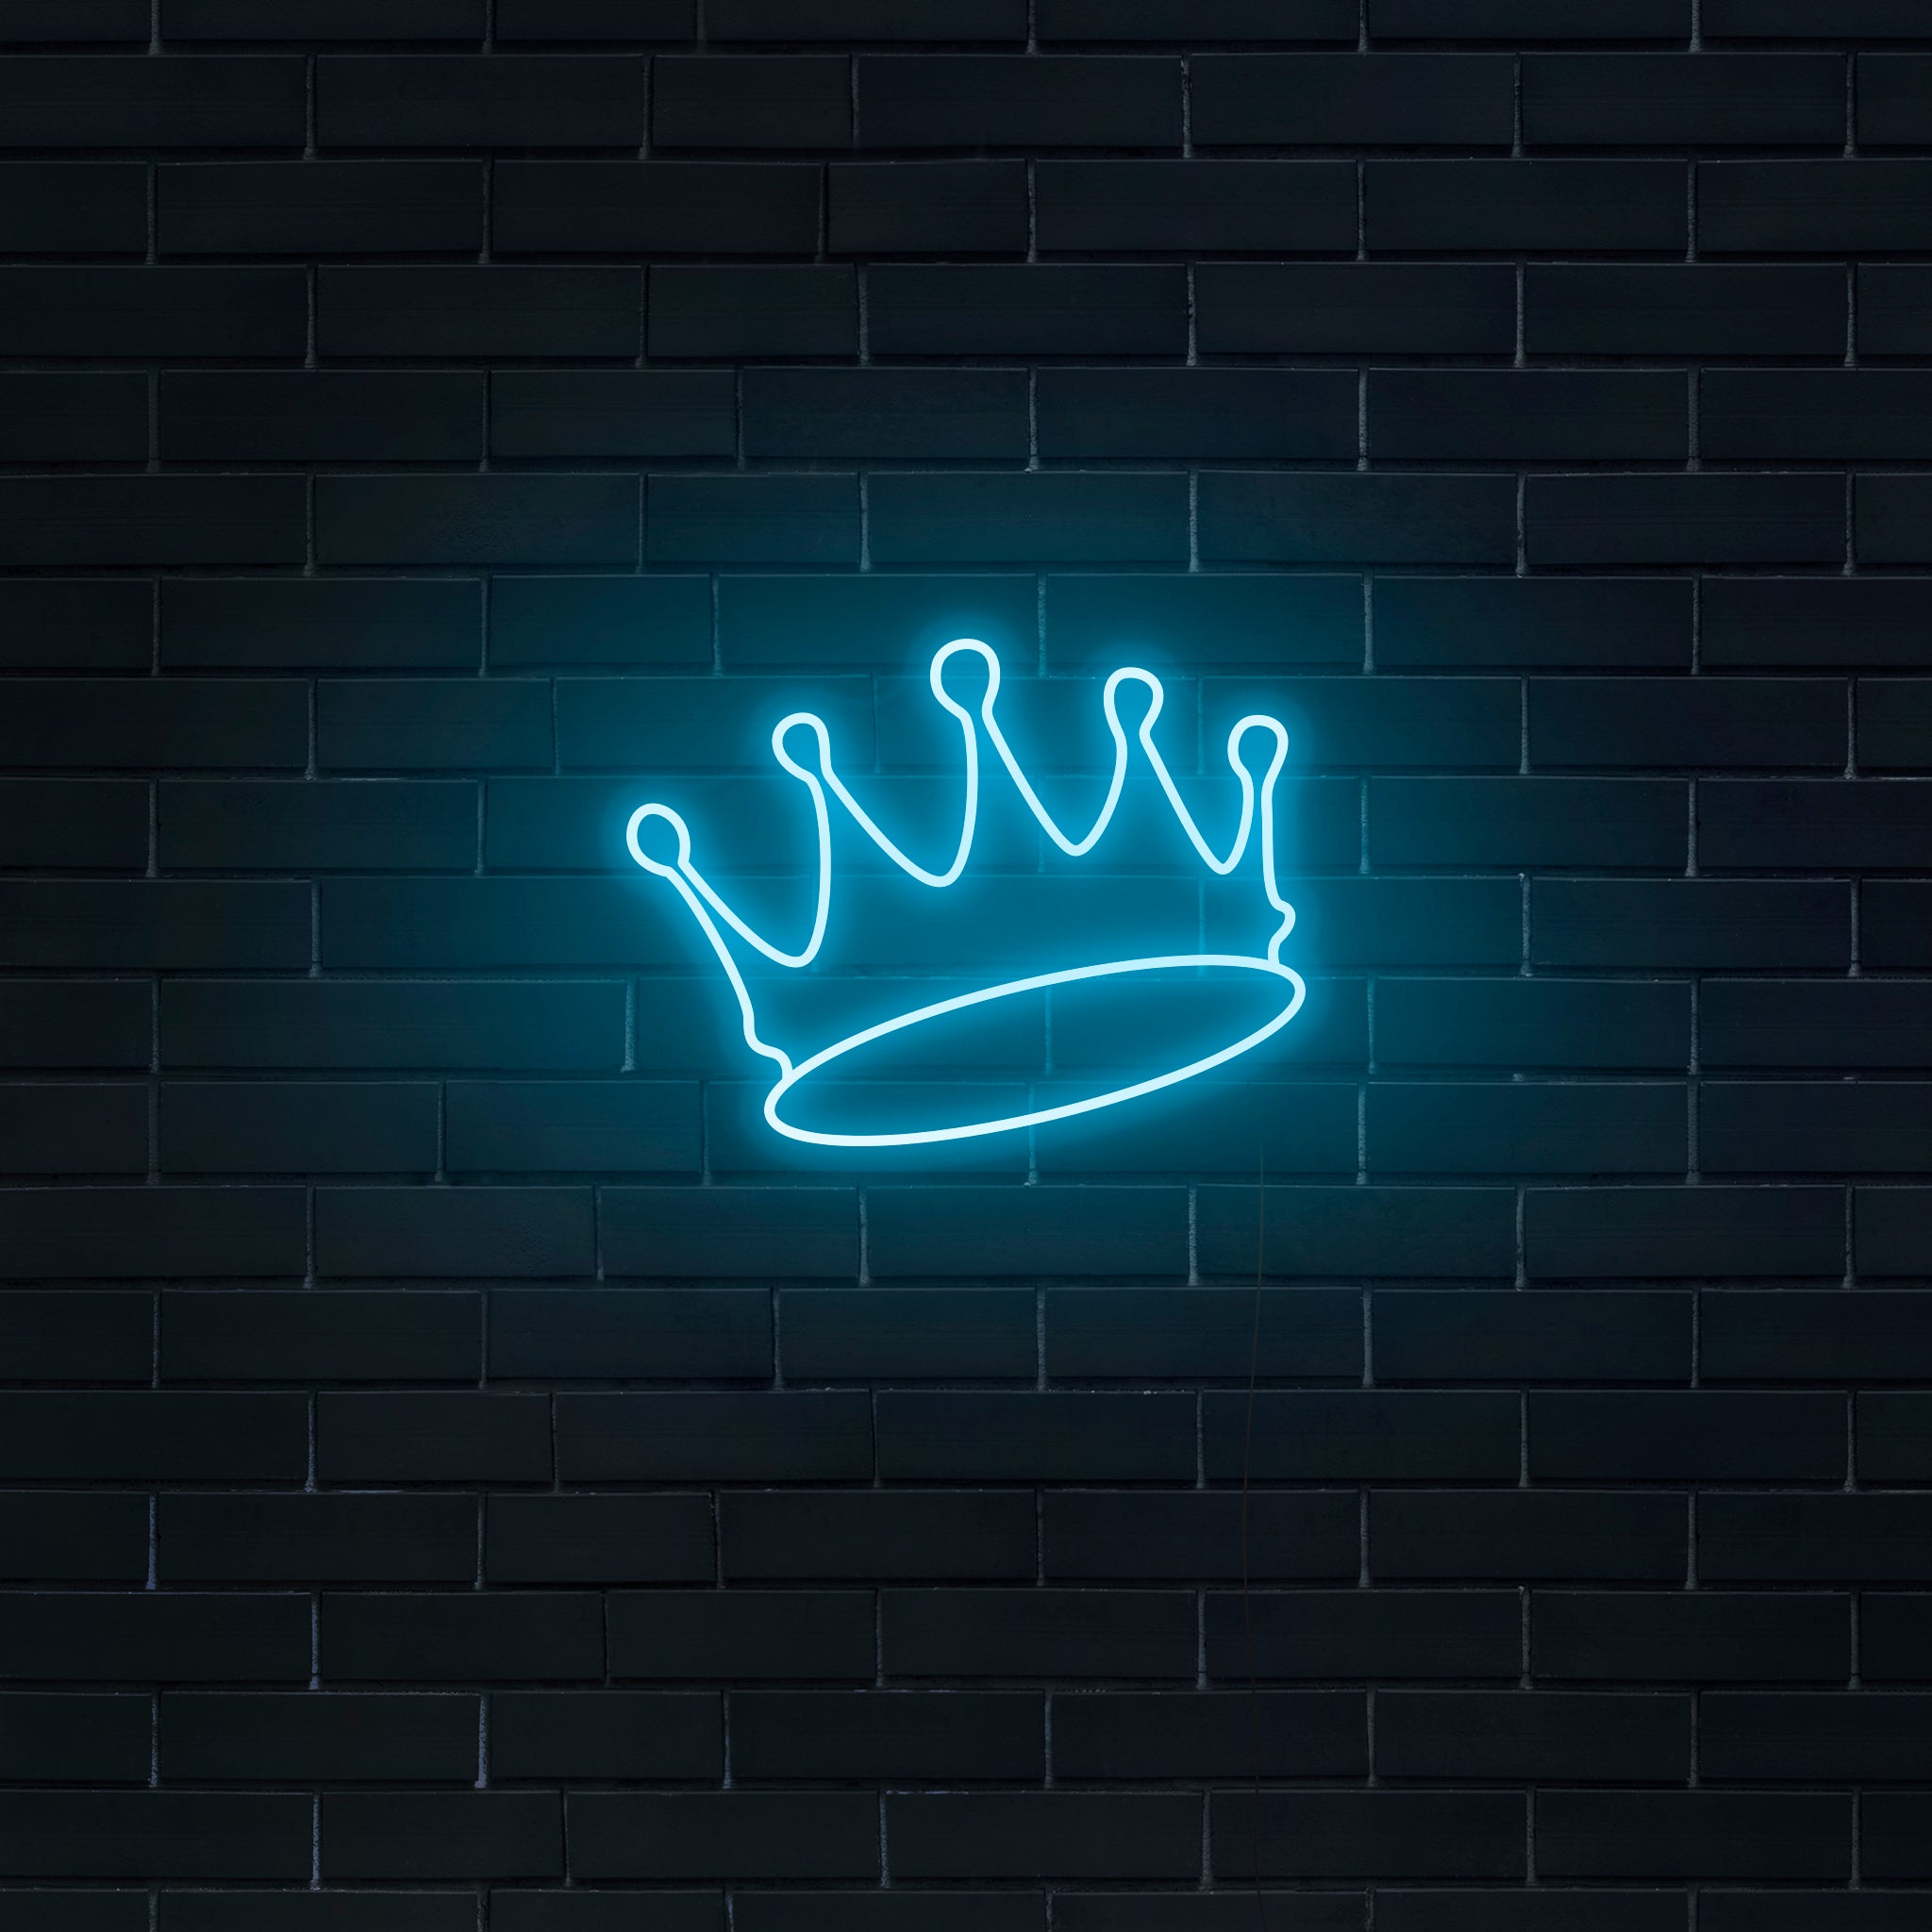 Neon sign of a crown on a brick wall - Neon blue